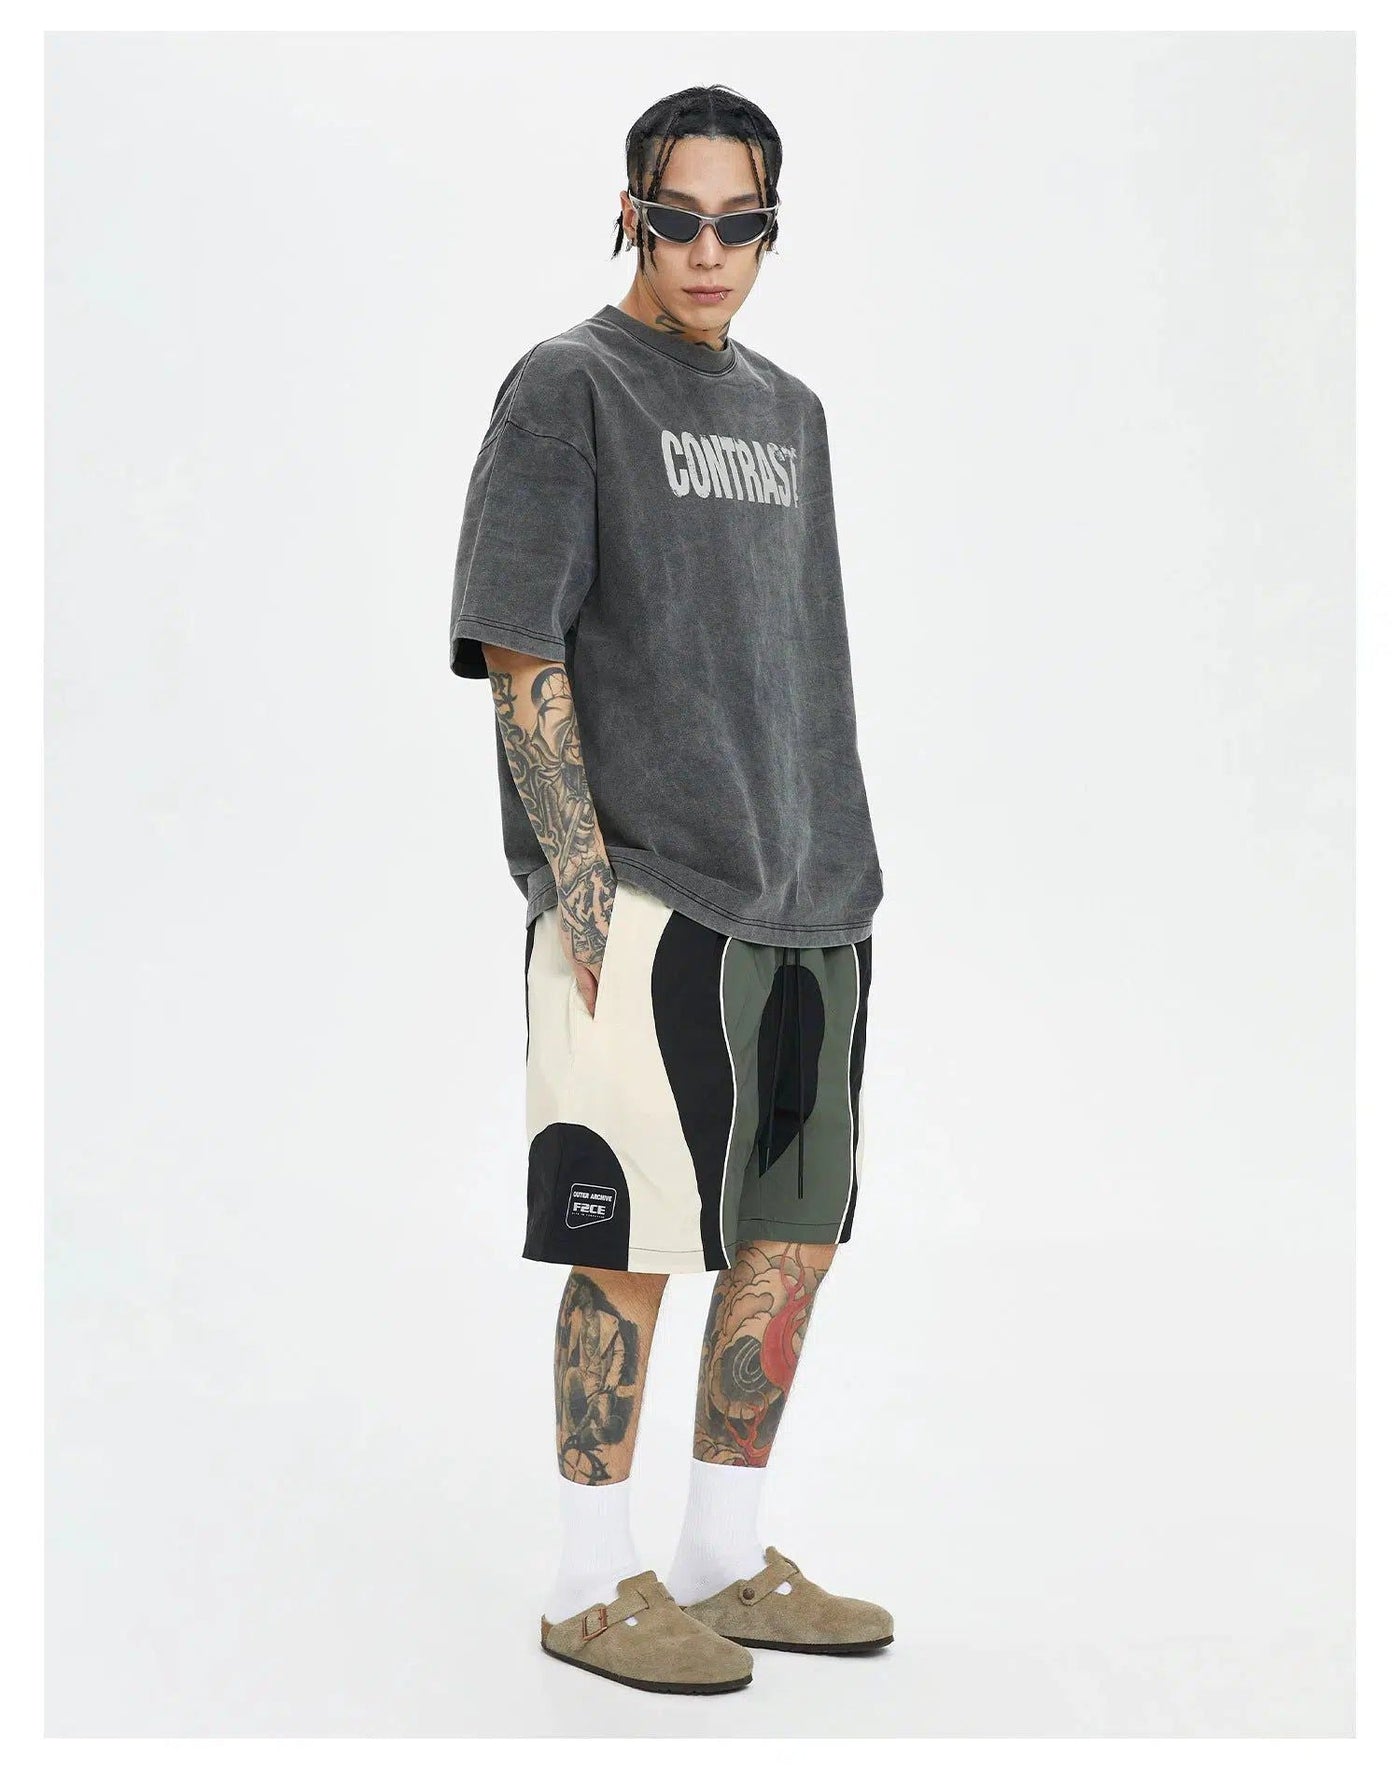 Spliced Curved Shapes Shorts Korean Street Fashion Shorts By Face2Face Shop Online at OH Vault